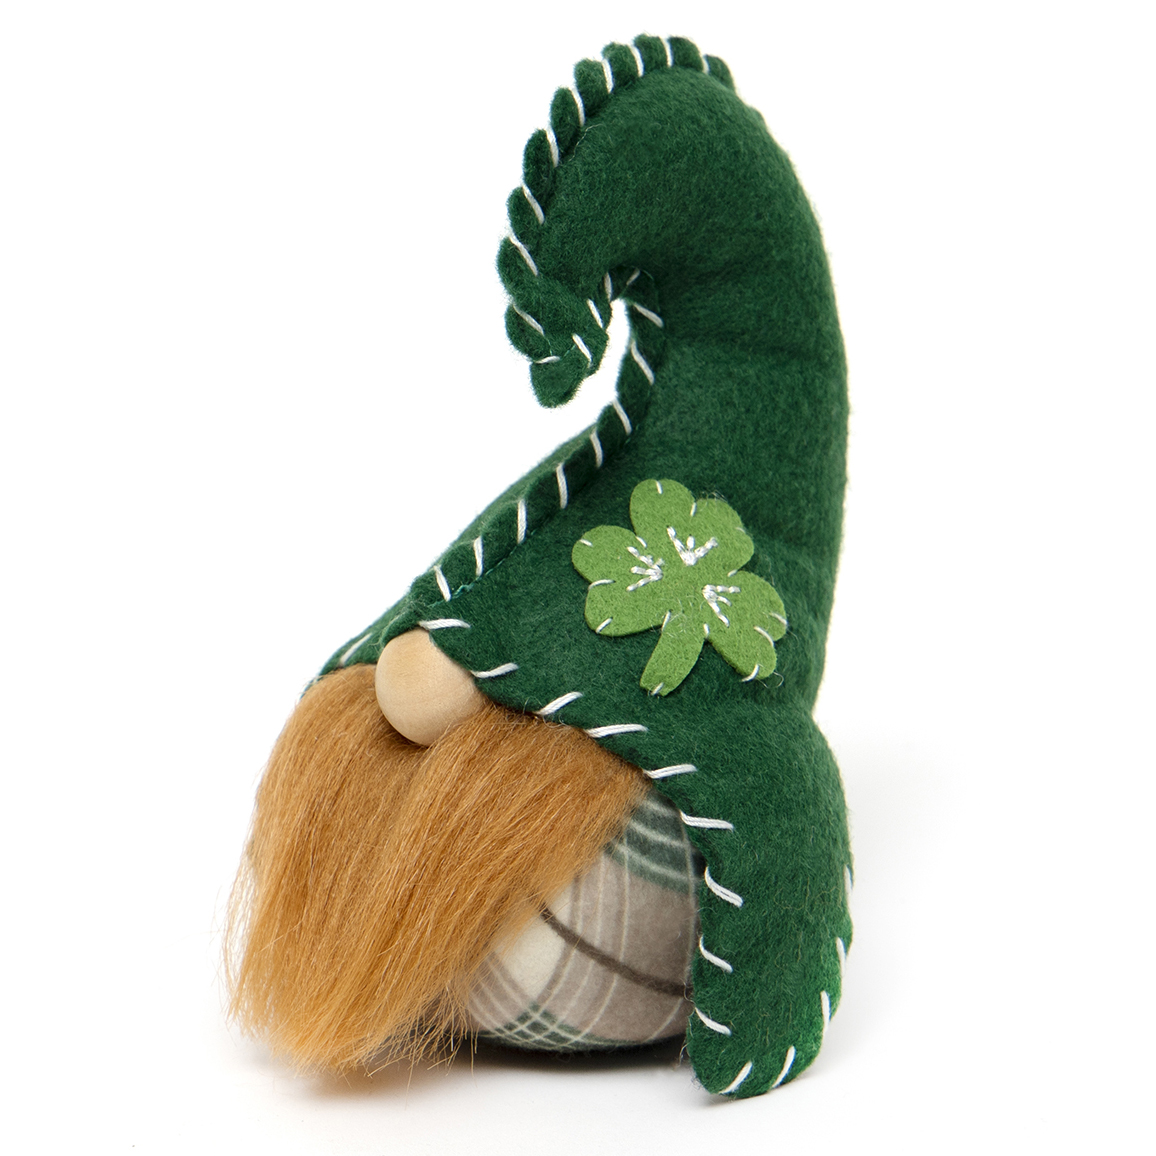 !Shamrock Jester Hat Gnome with Stitching 5.5" Small